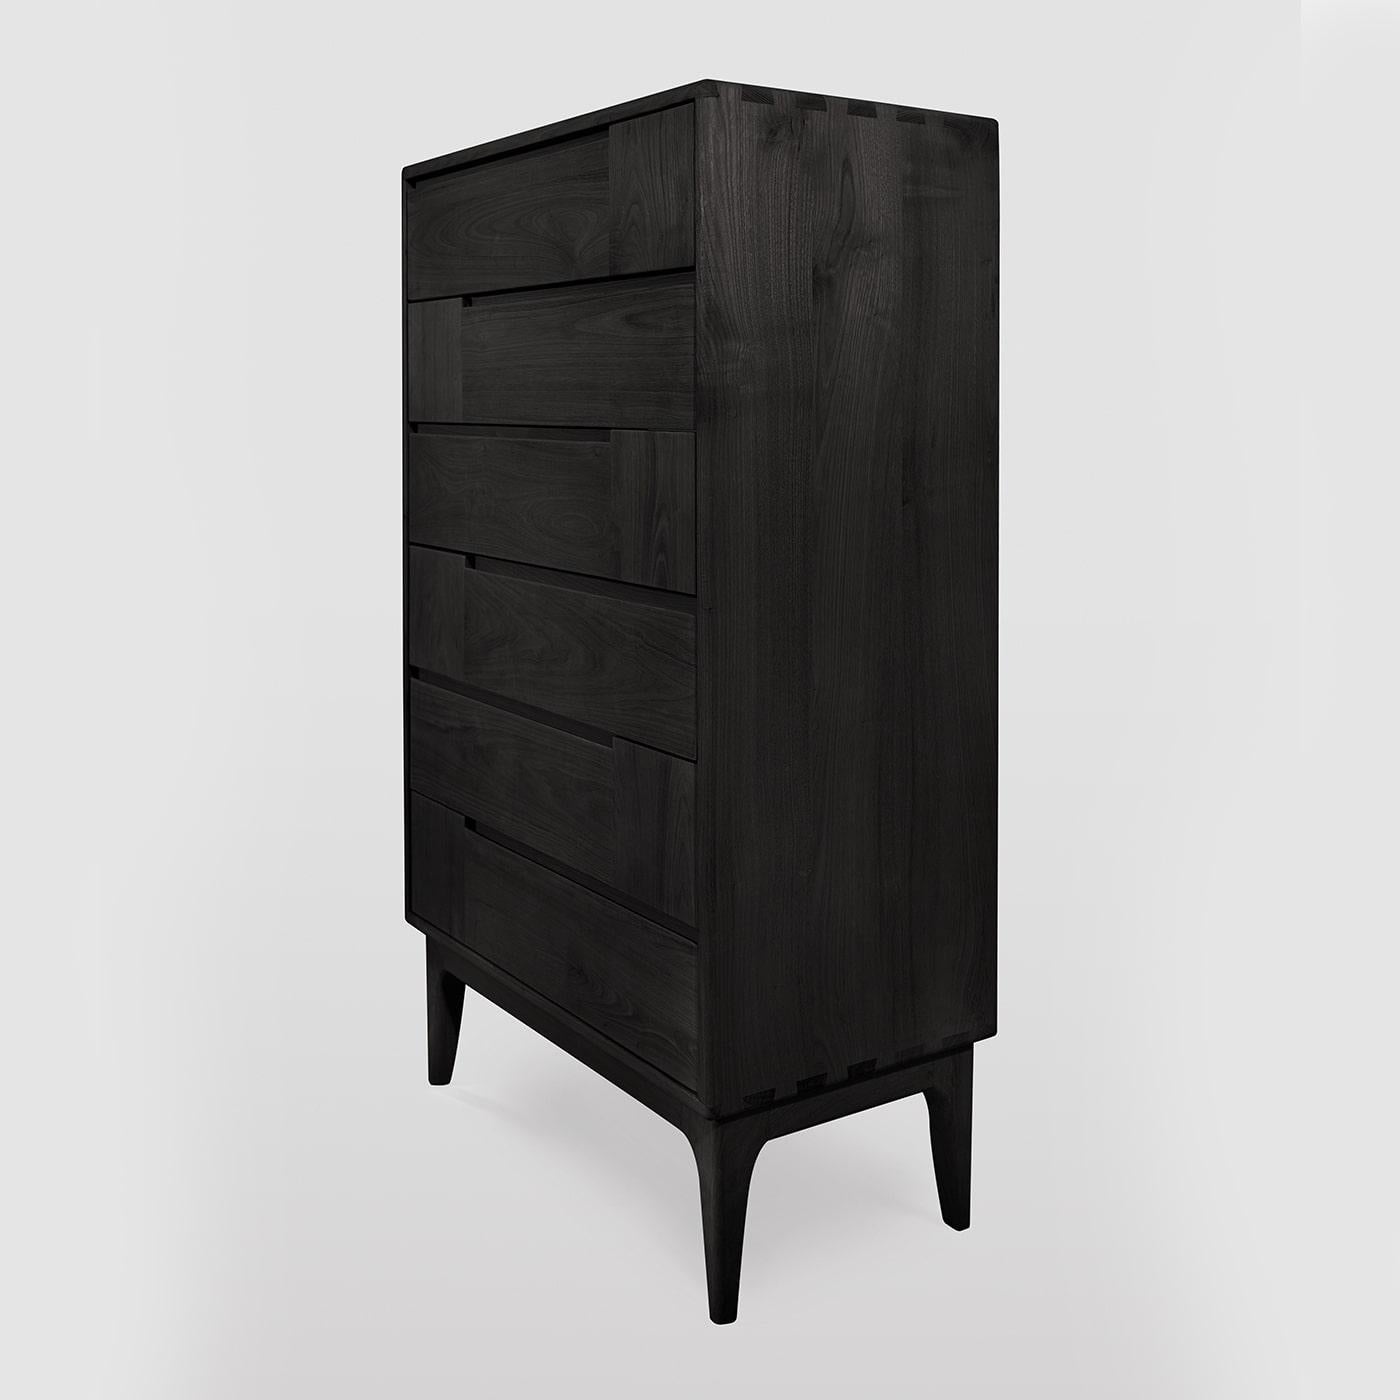 A total-black look of sophisticated charm, this Scandinavian-style dresser will make a stately addition to a contemporary interior. Handcrafted of colored solid chestnut, it features six drawers boasting horizontal and vertical lines, creating a